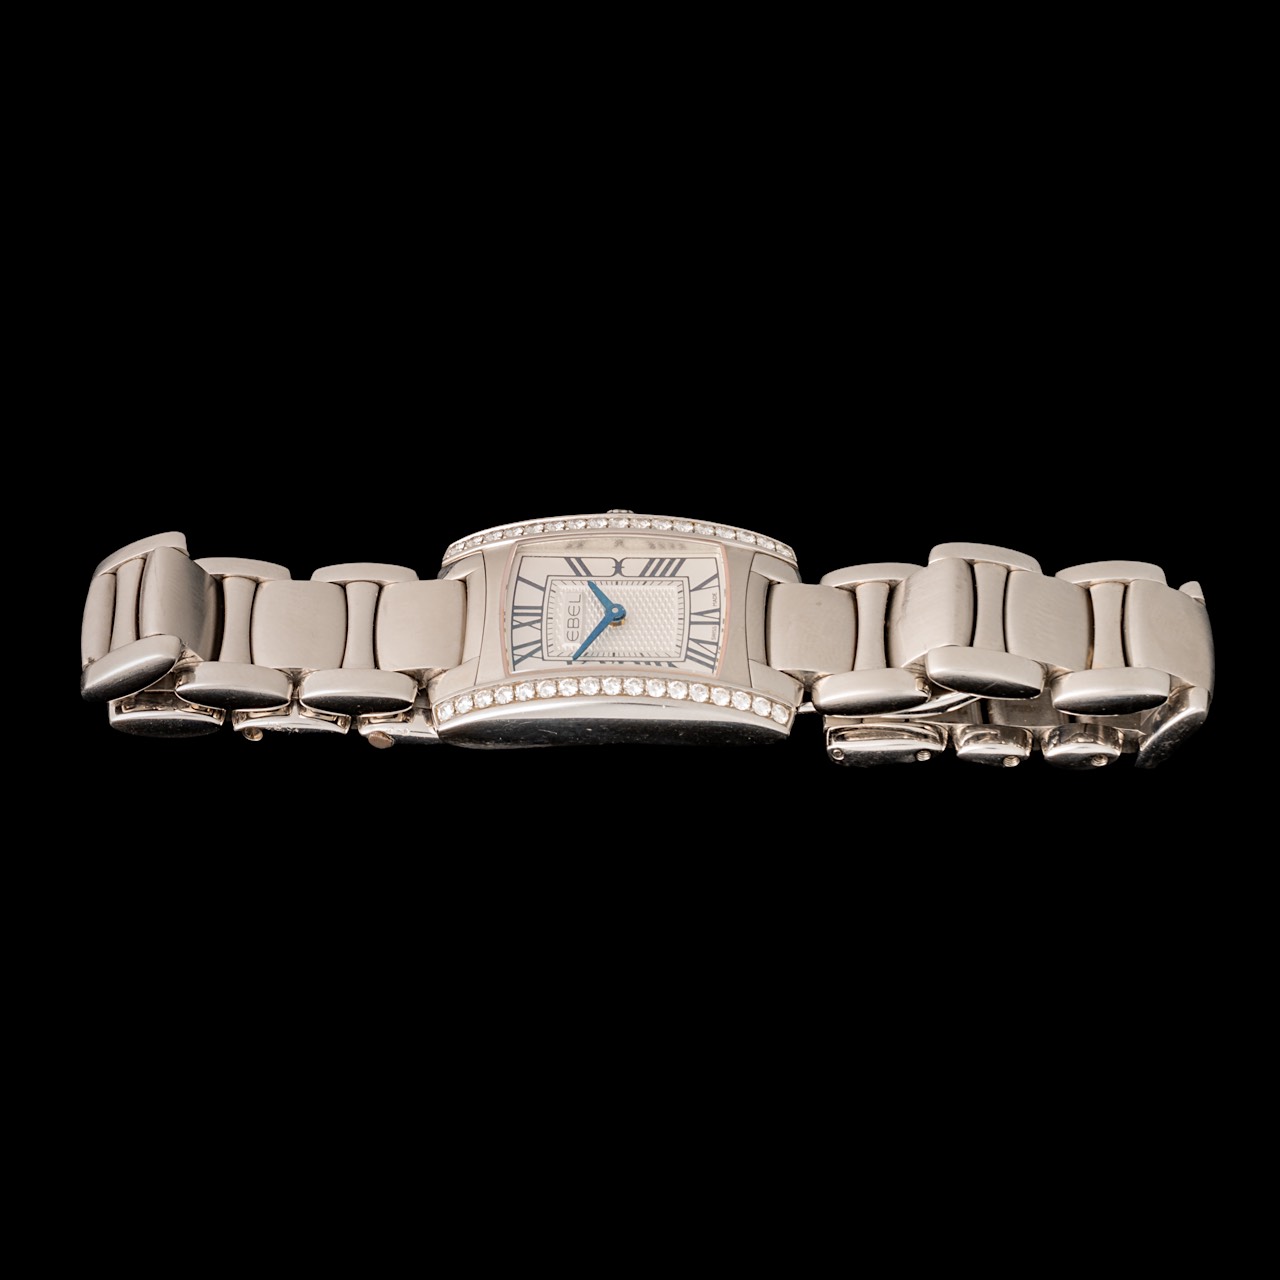 An Ebel 'Brasilia' ladies' watch, stainless steel case with 17 brilliant cut diamonds - Image 3 of 5